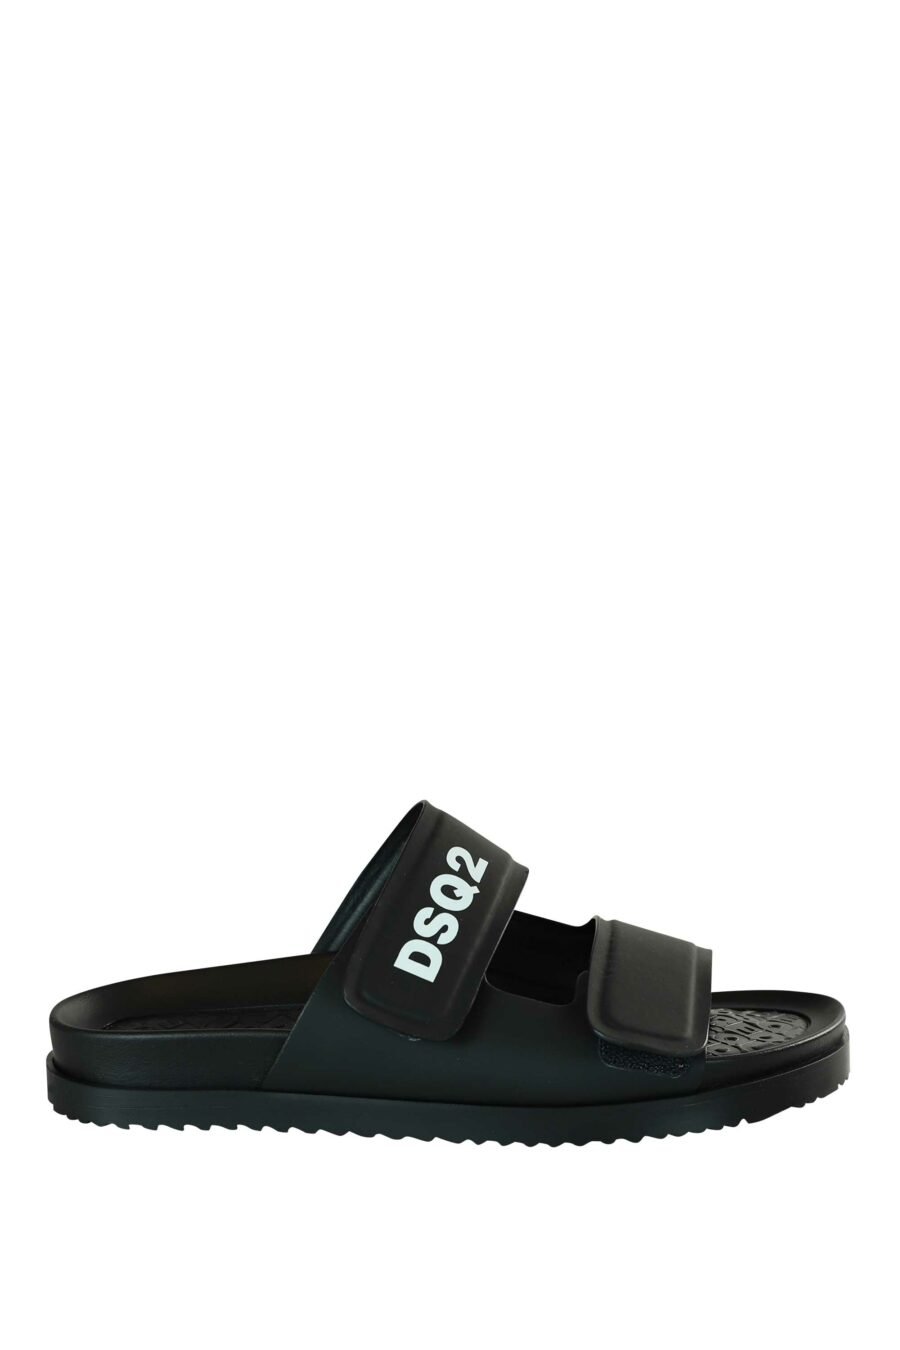 Black sandals with white "dsq2" logo and velcro - 8055777203200